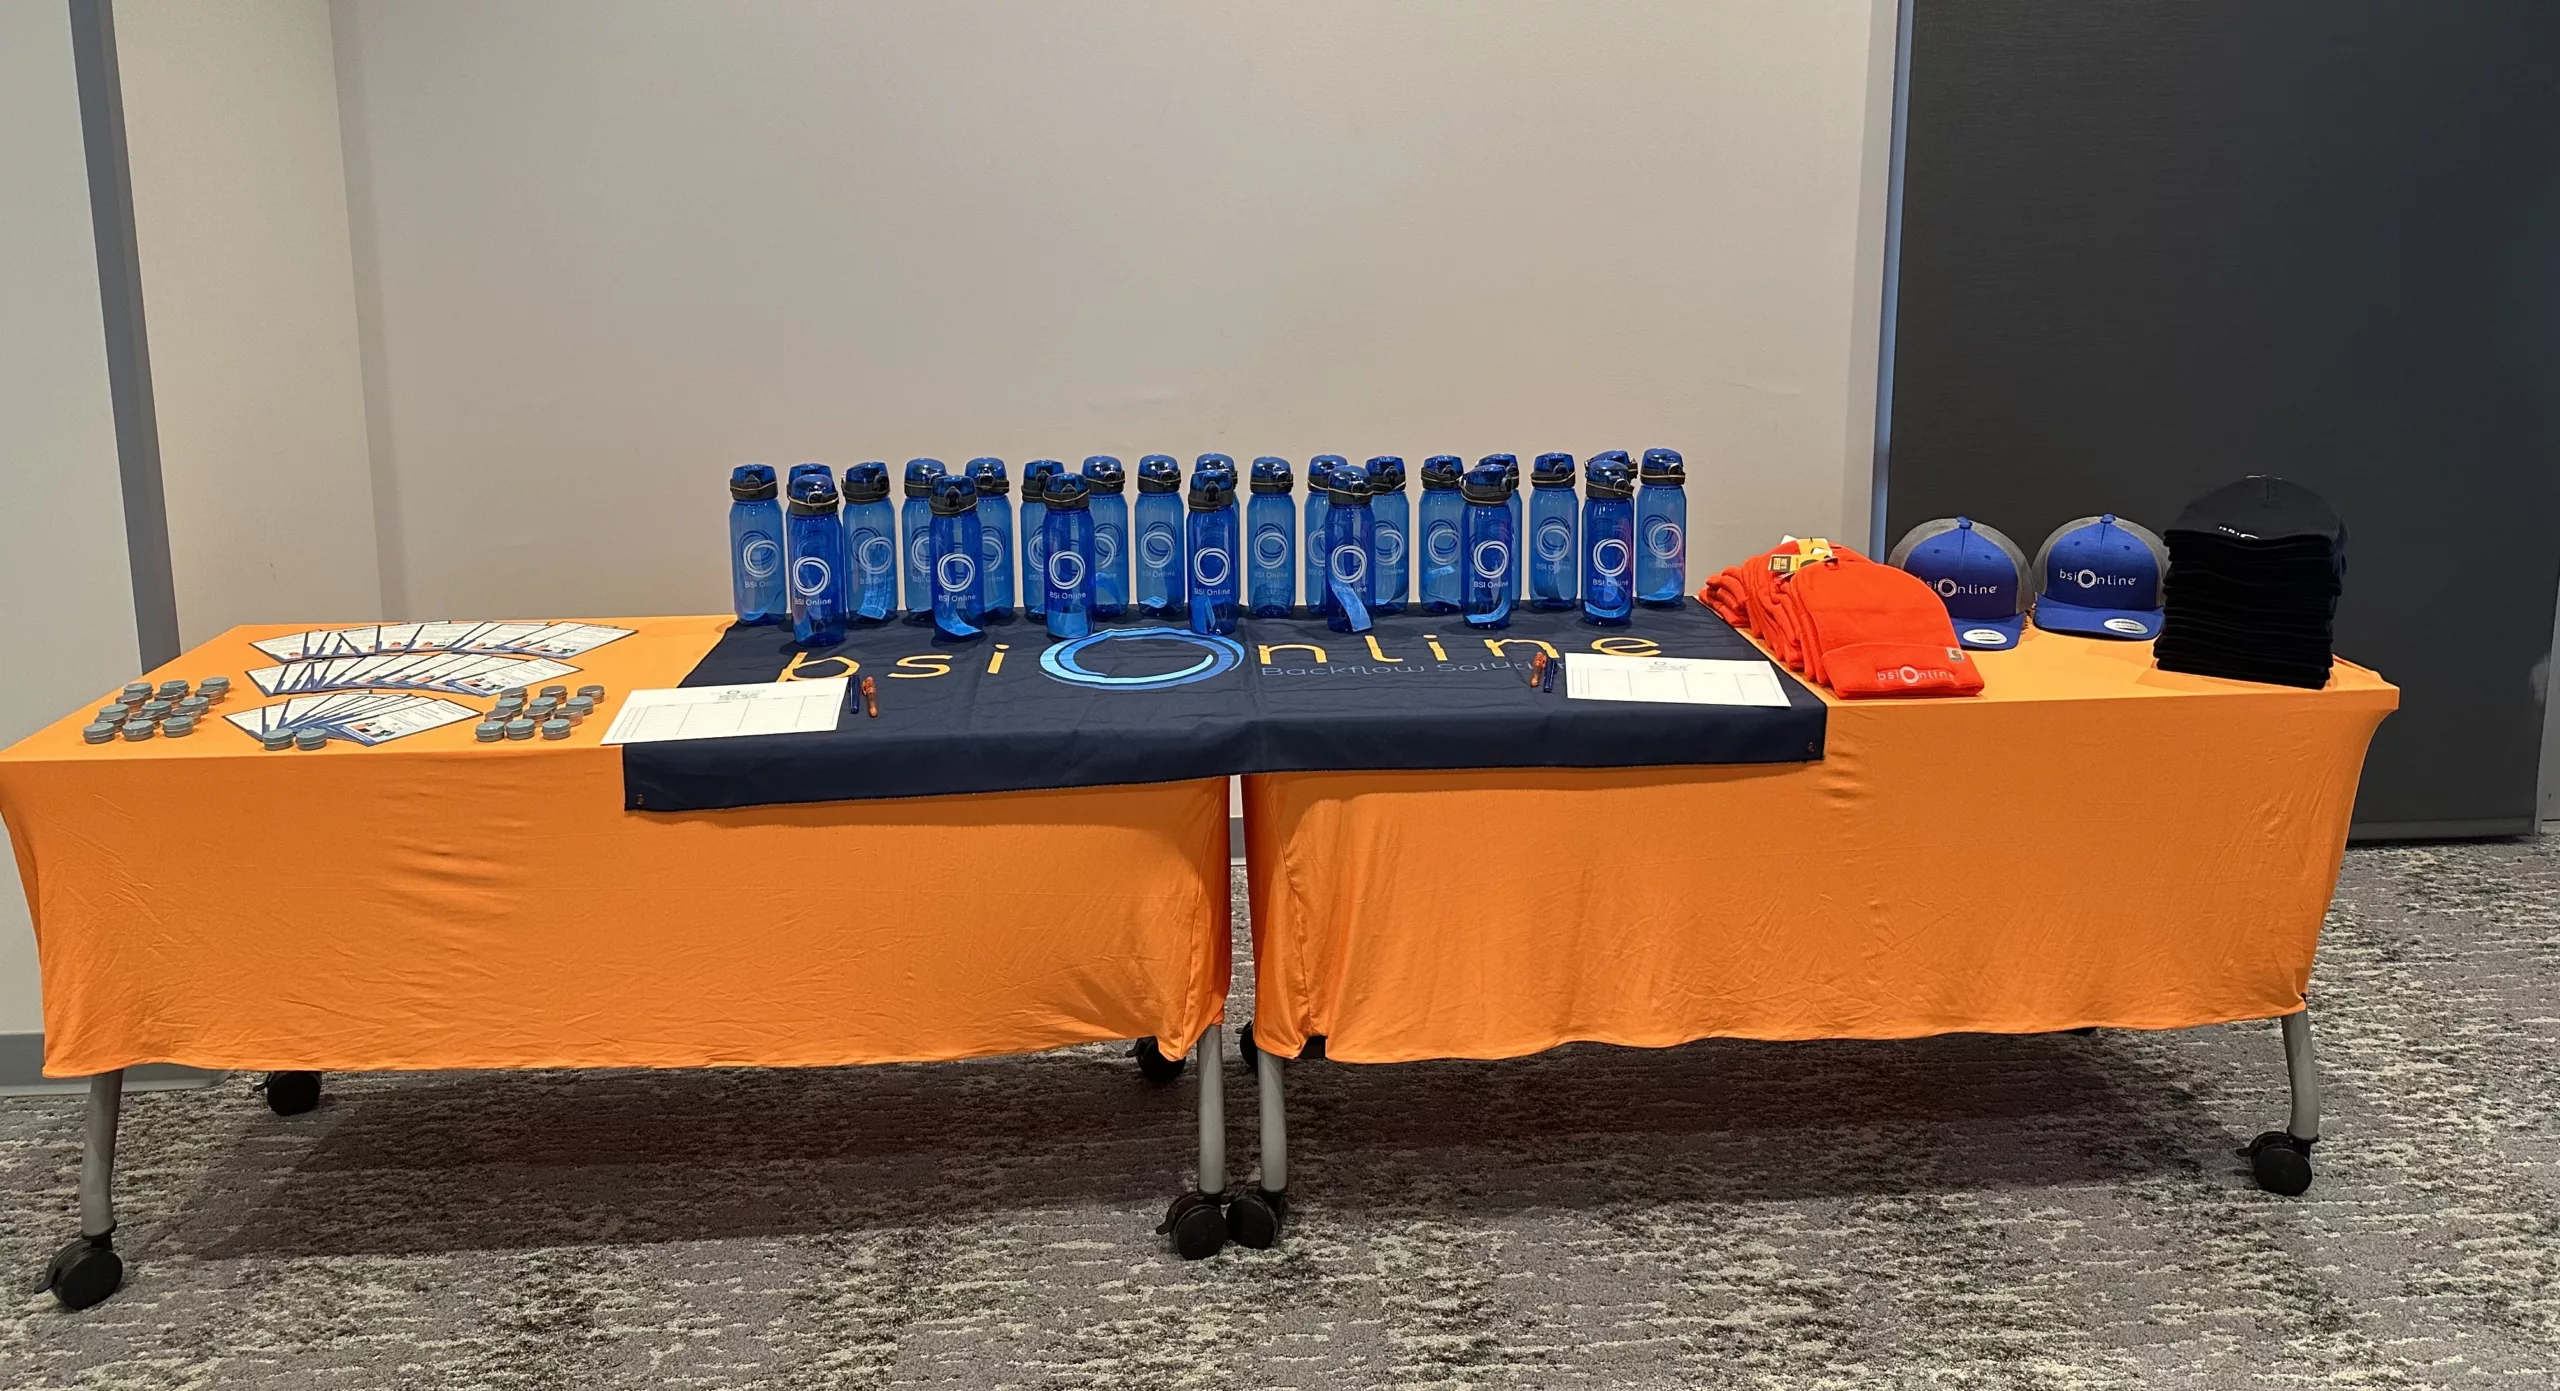 A Backflow solutions swag table at a Lunch and Learn